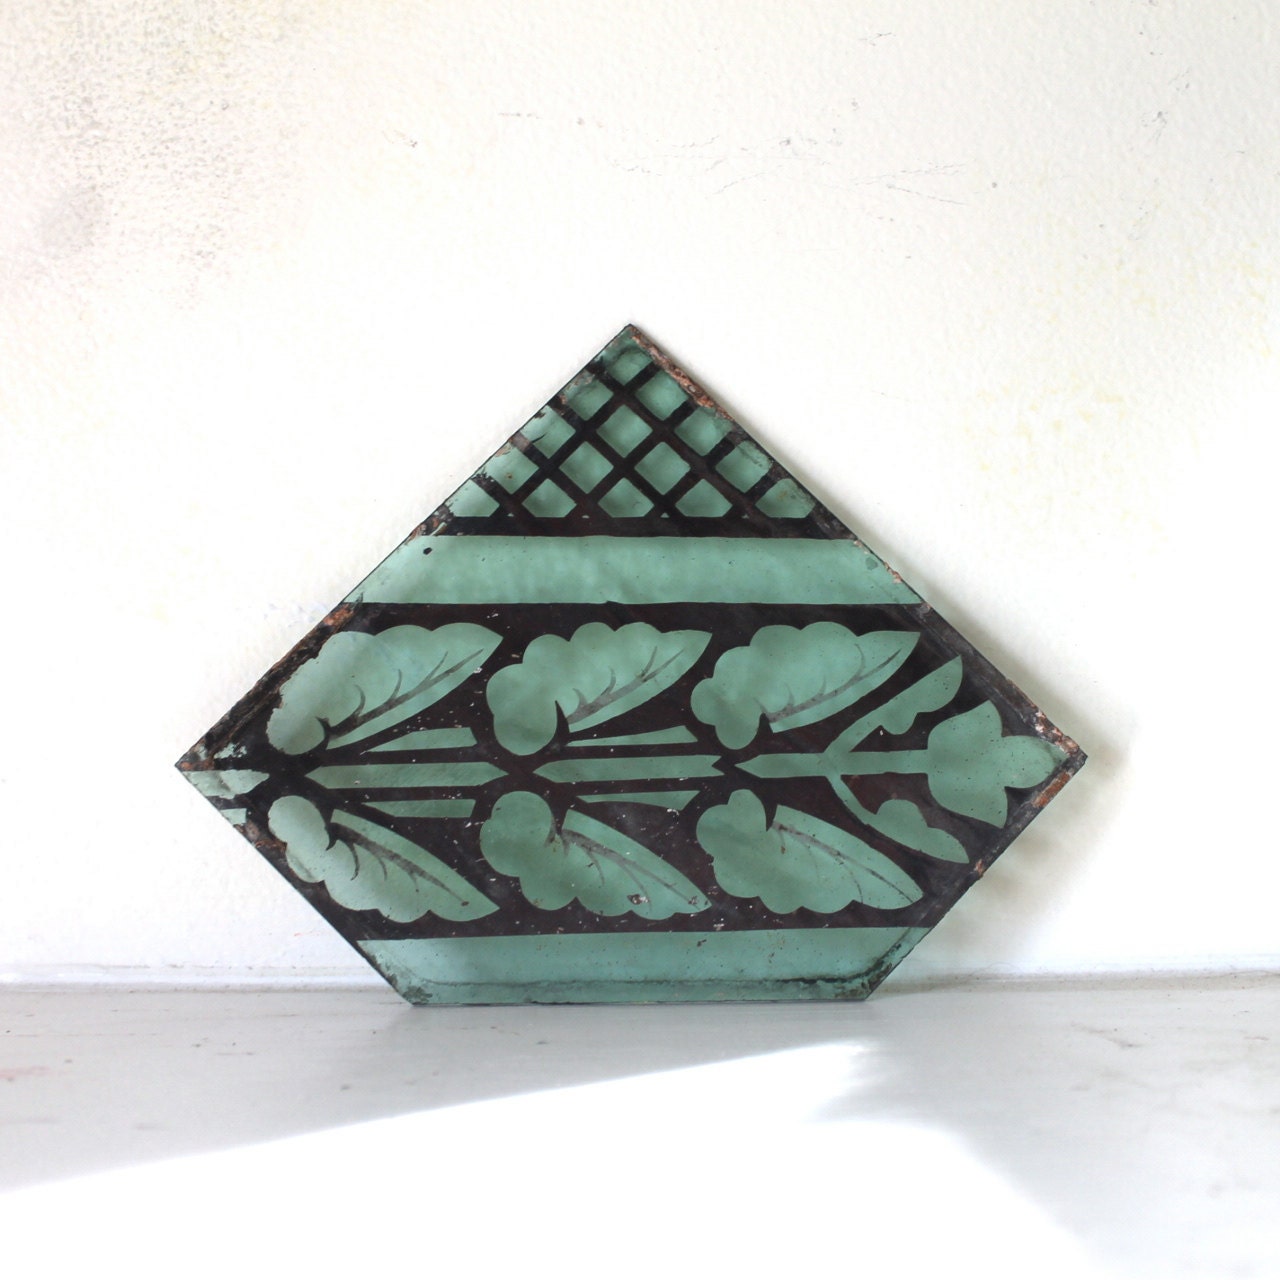 Anitque stained glass fragment 1900 - 1920's handpainted blue / green glass from chapel in Chicago